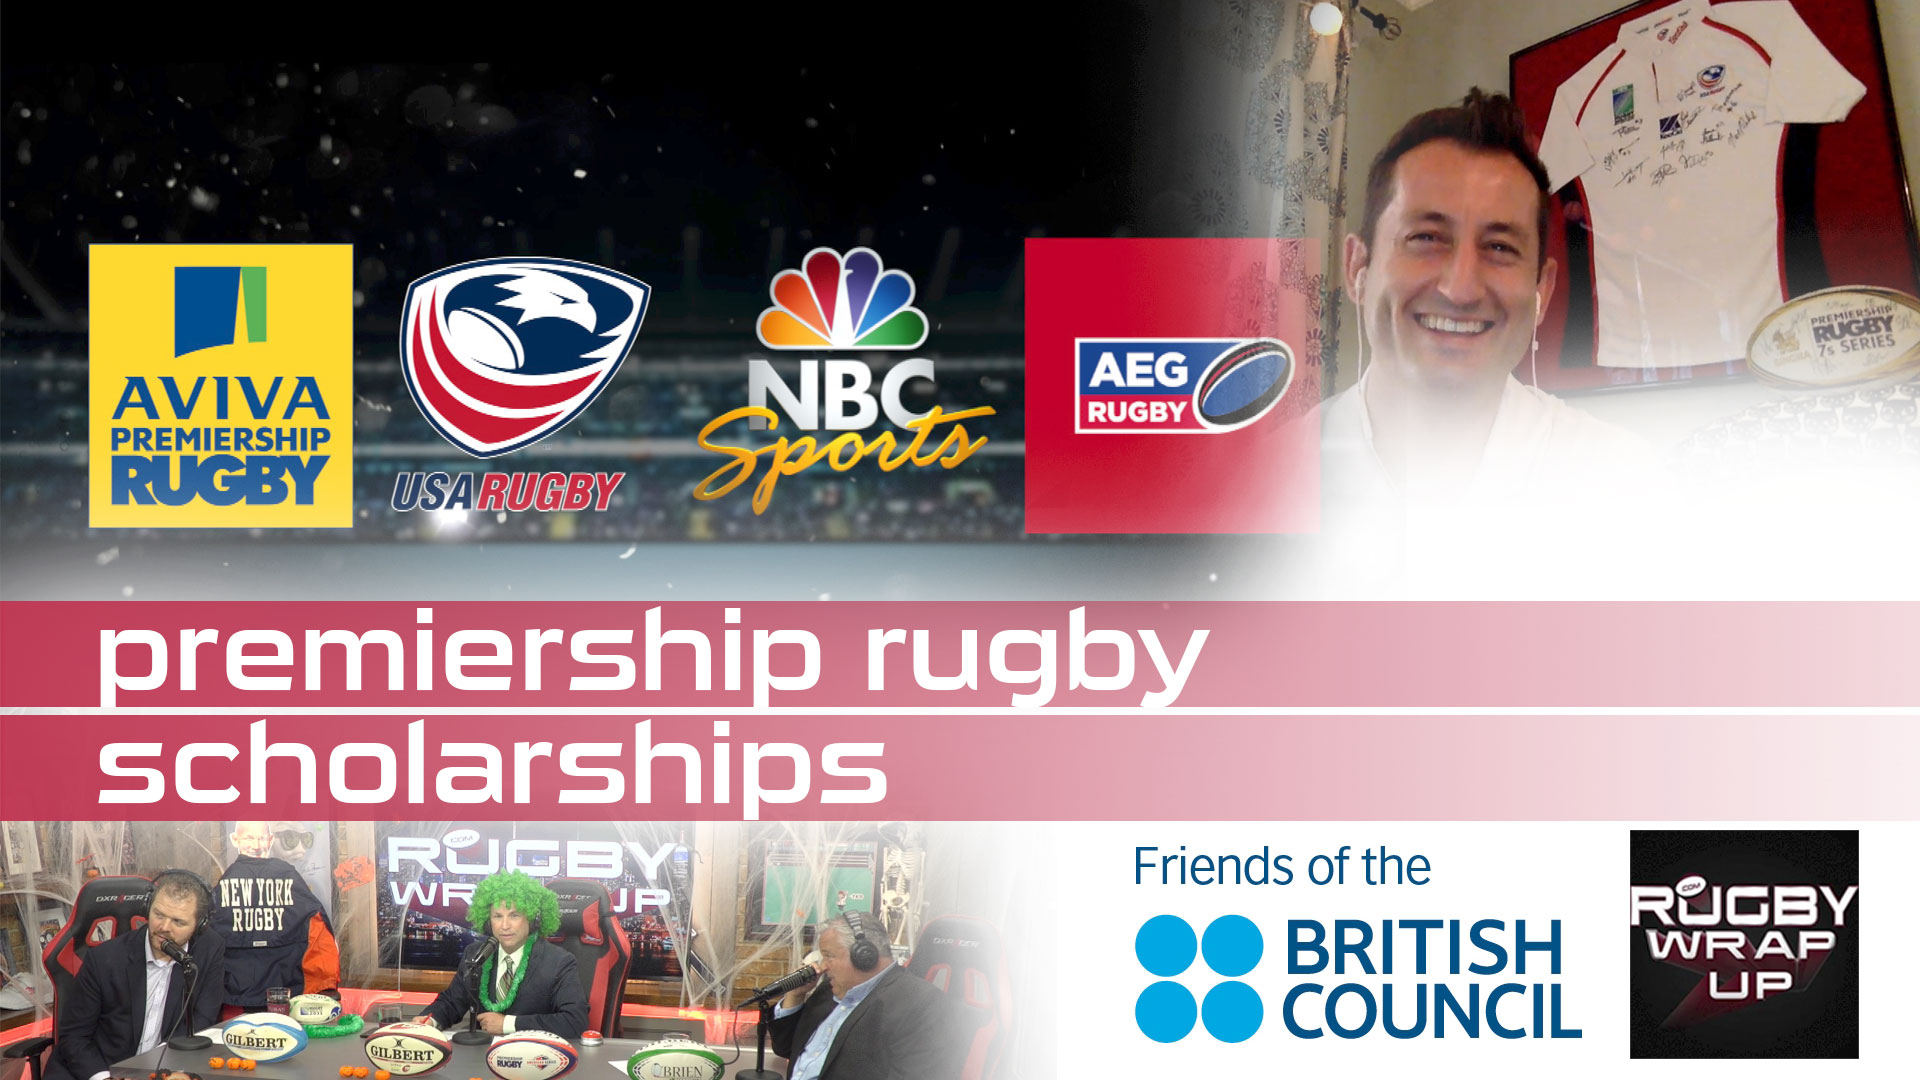 Dallen_Stanford, Friends of the British Council, premiership-rugby-scholarship Rugby_Wrap_Up